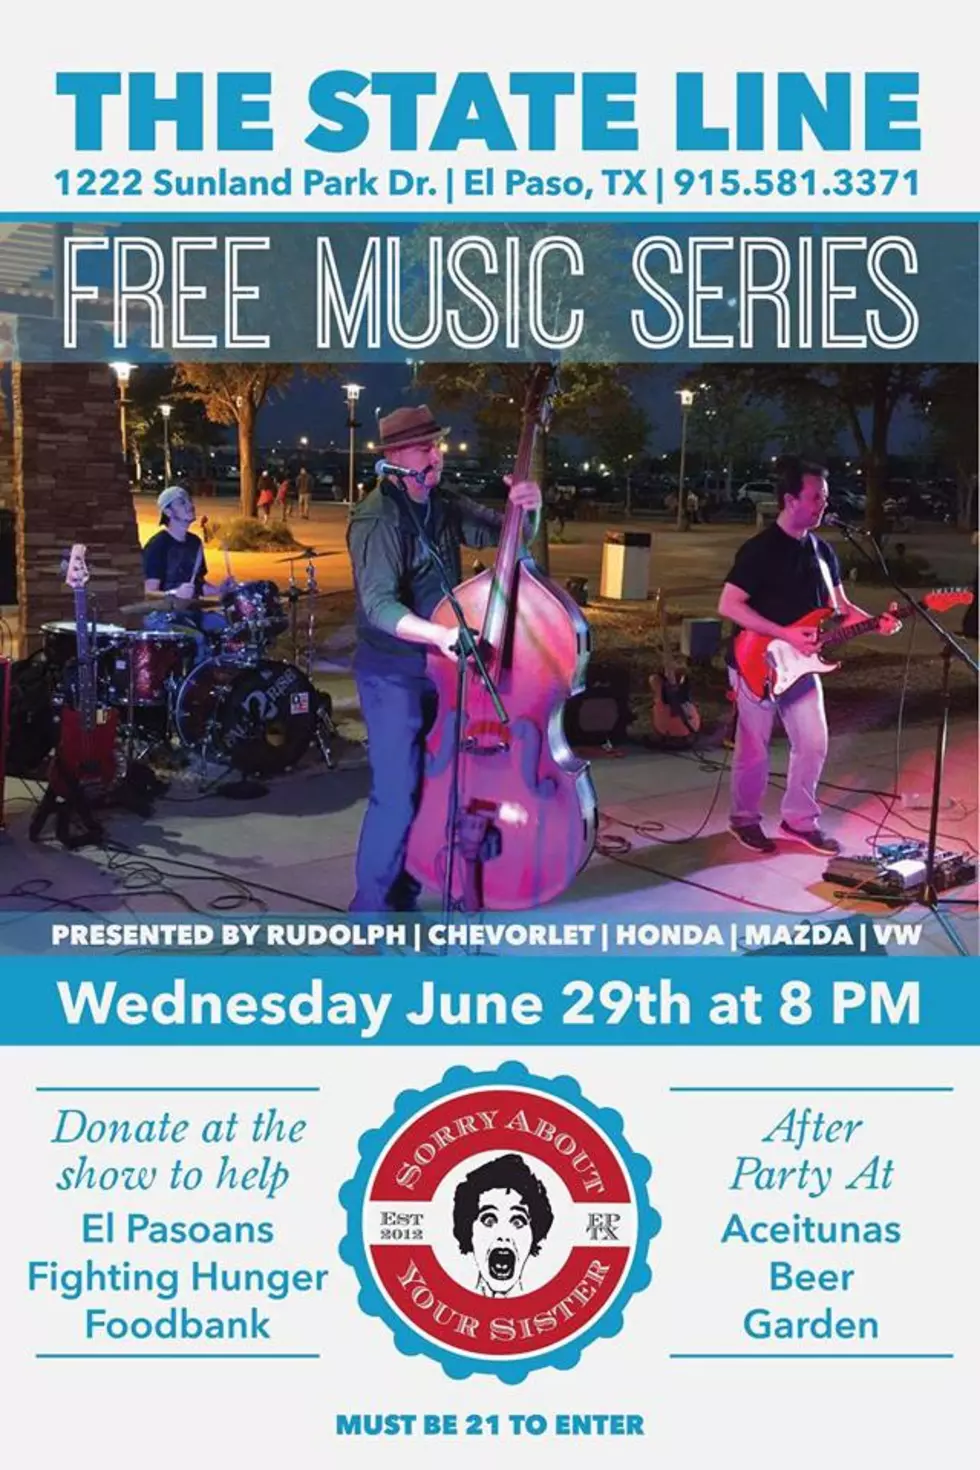  FREE Music Series is Back